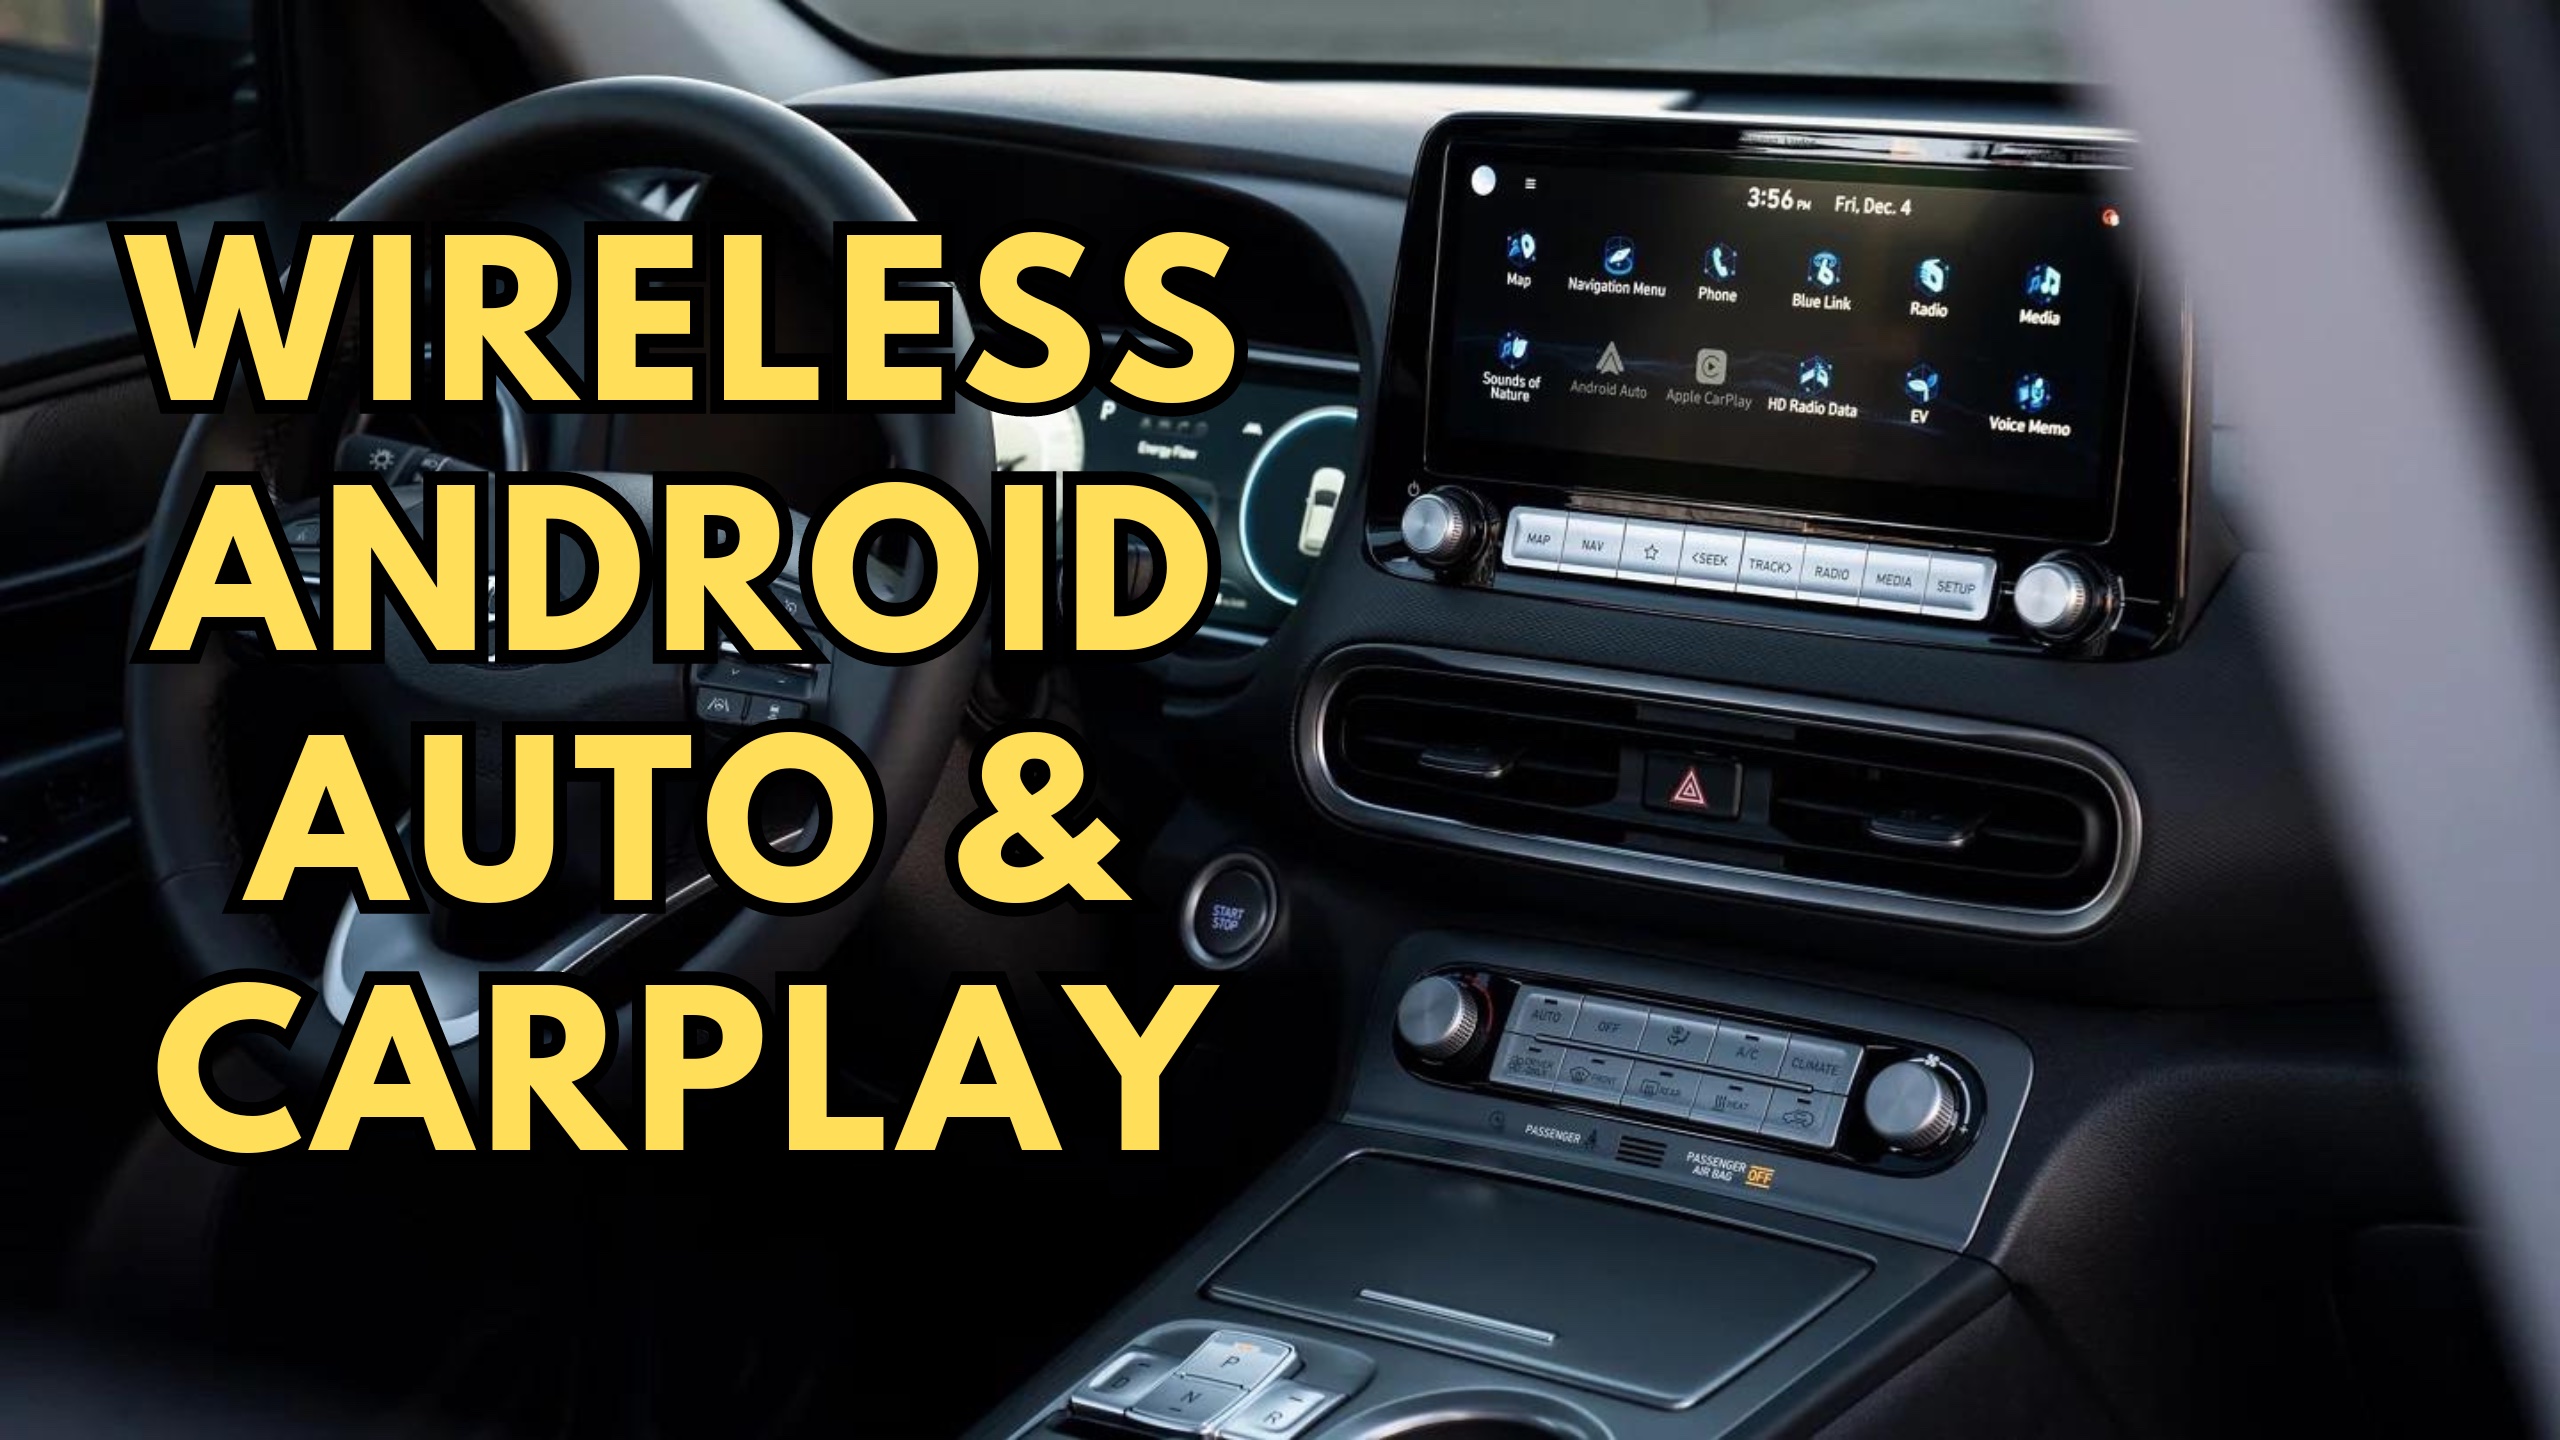 Hyundai Finally Announces Wireless Android Auto and CarPlay Software Update  - autoevolution